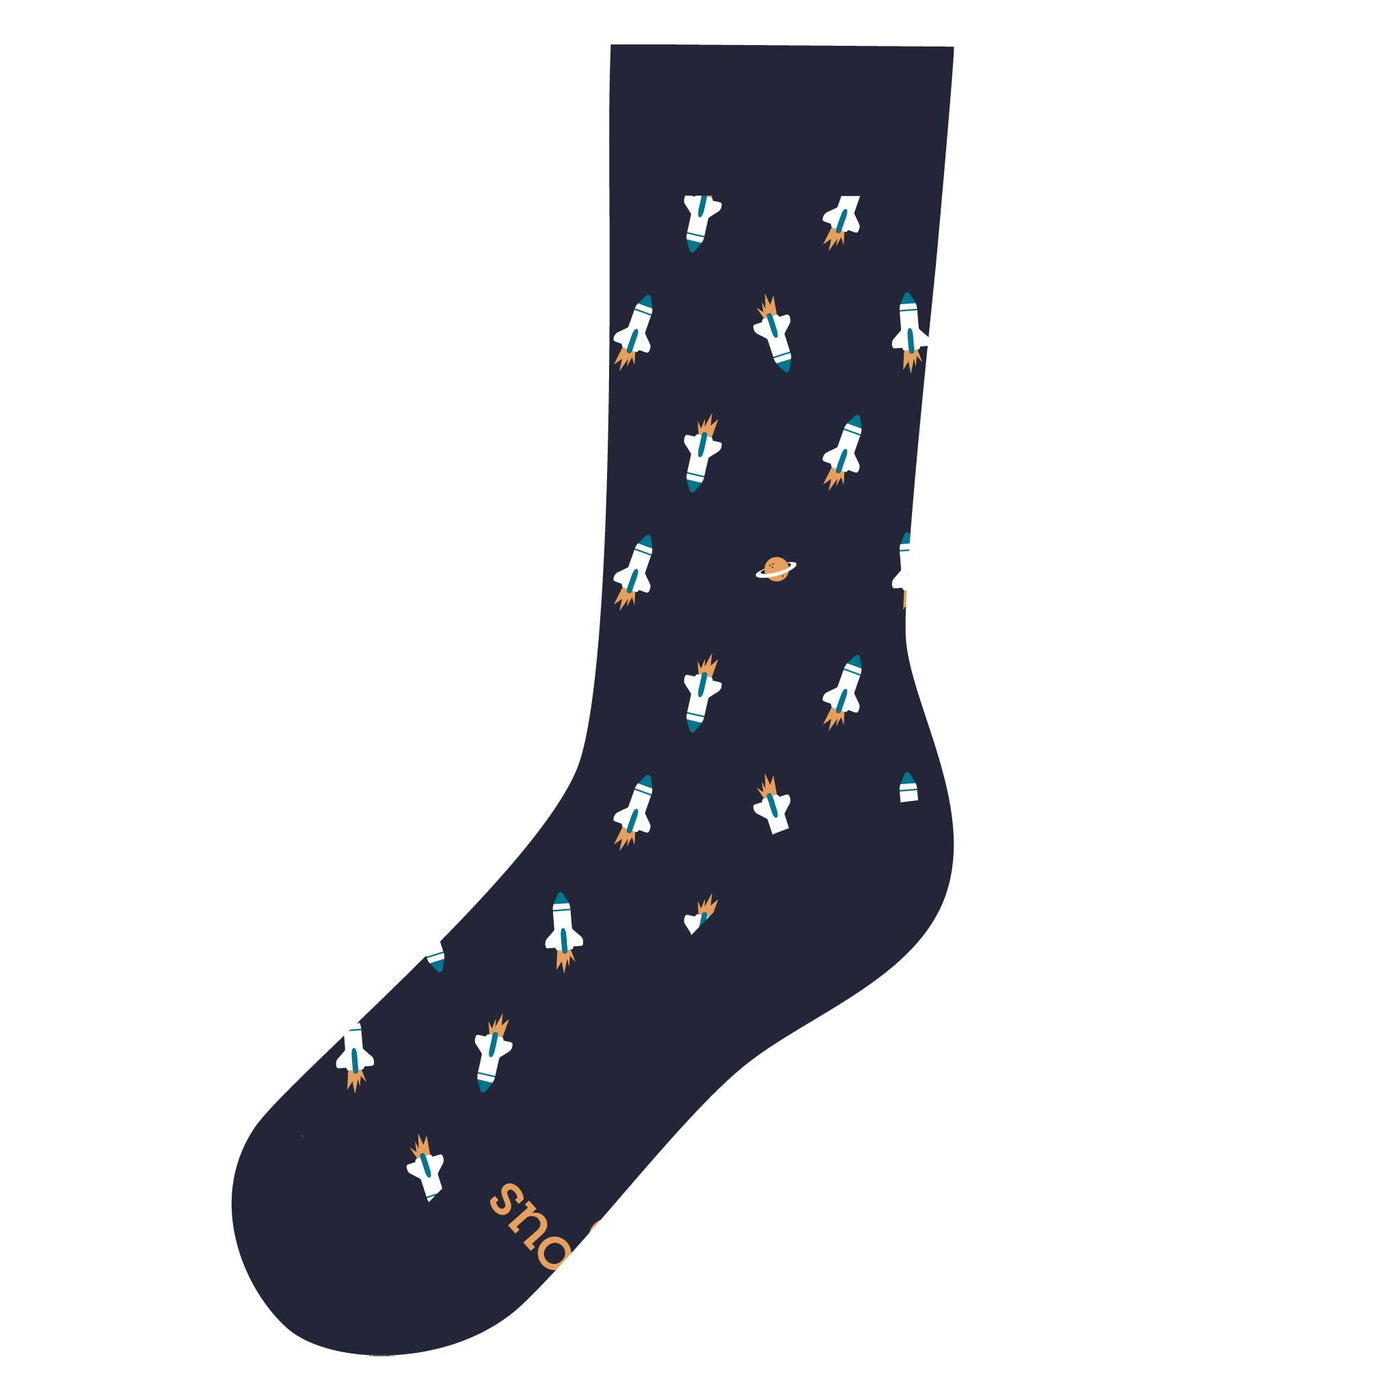 Socks that support space exploration - Women's Size 5-9